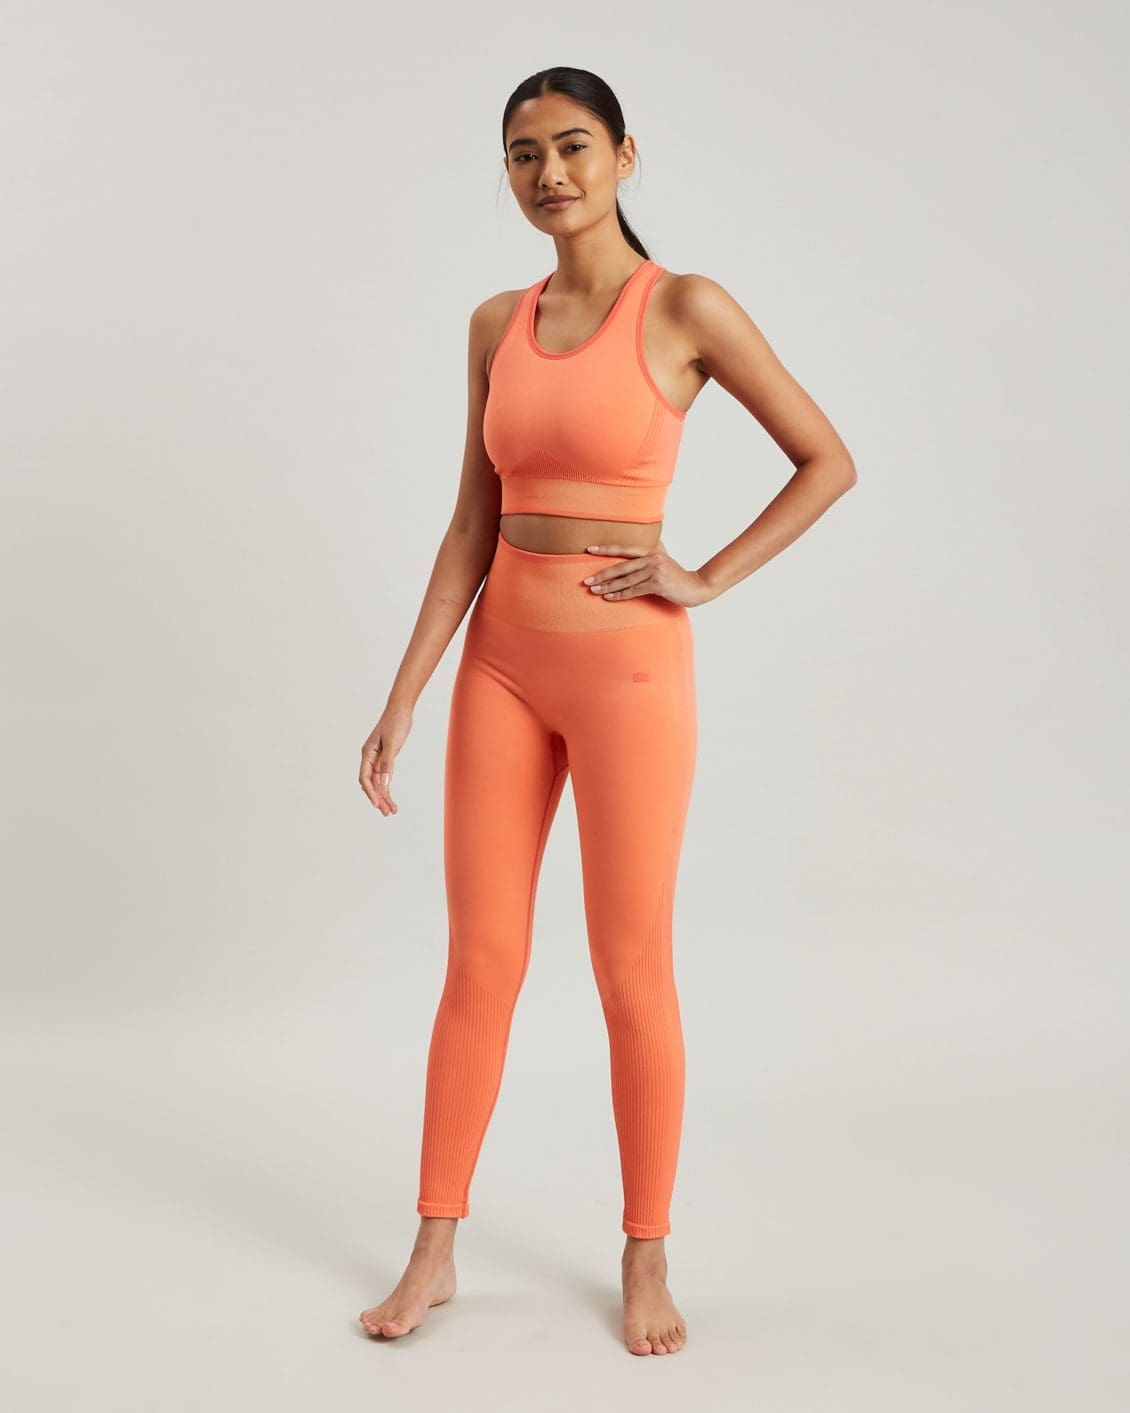 Shop Gymshark's 60% Off Sale for Stylish Sports Bras, Running Shorts &  Leggings for as Low as $14